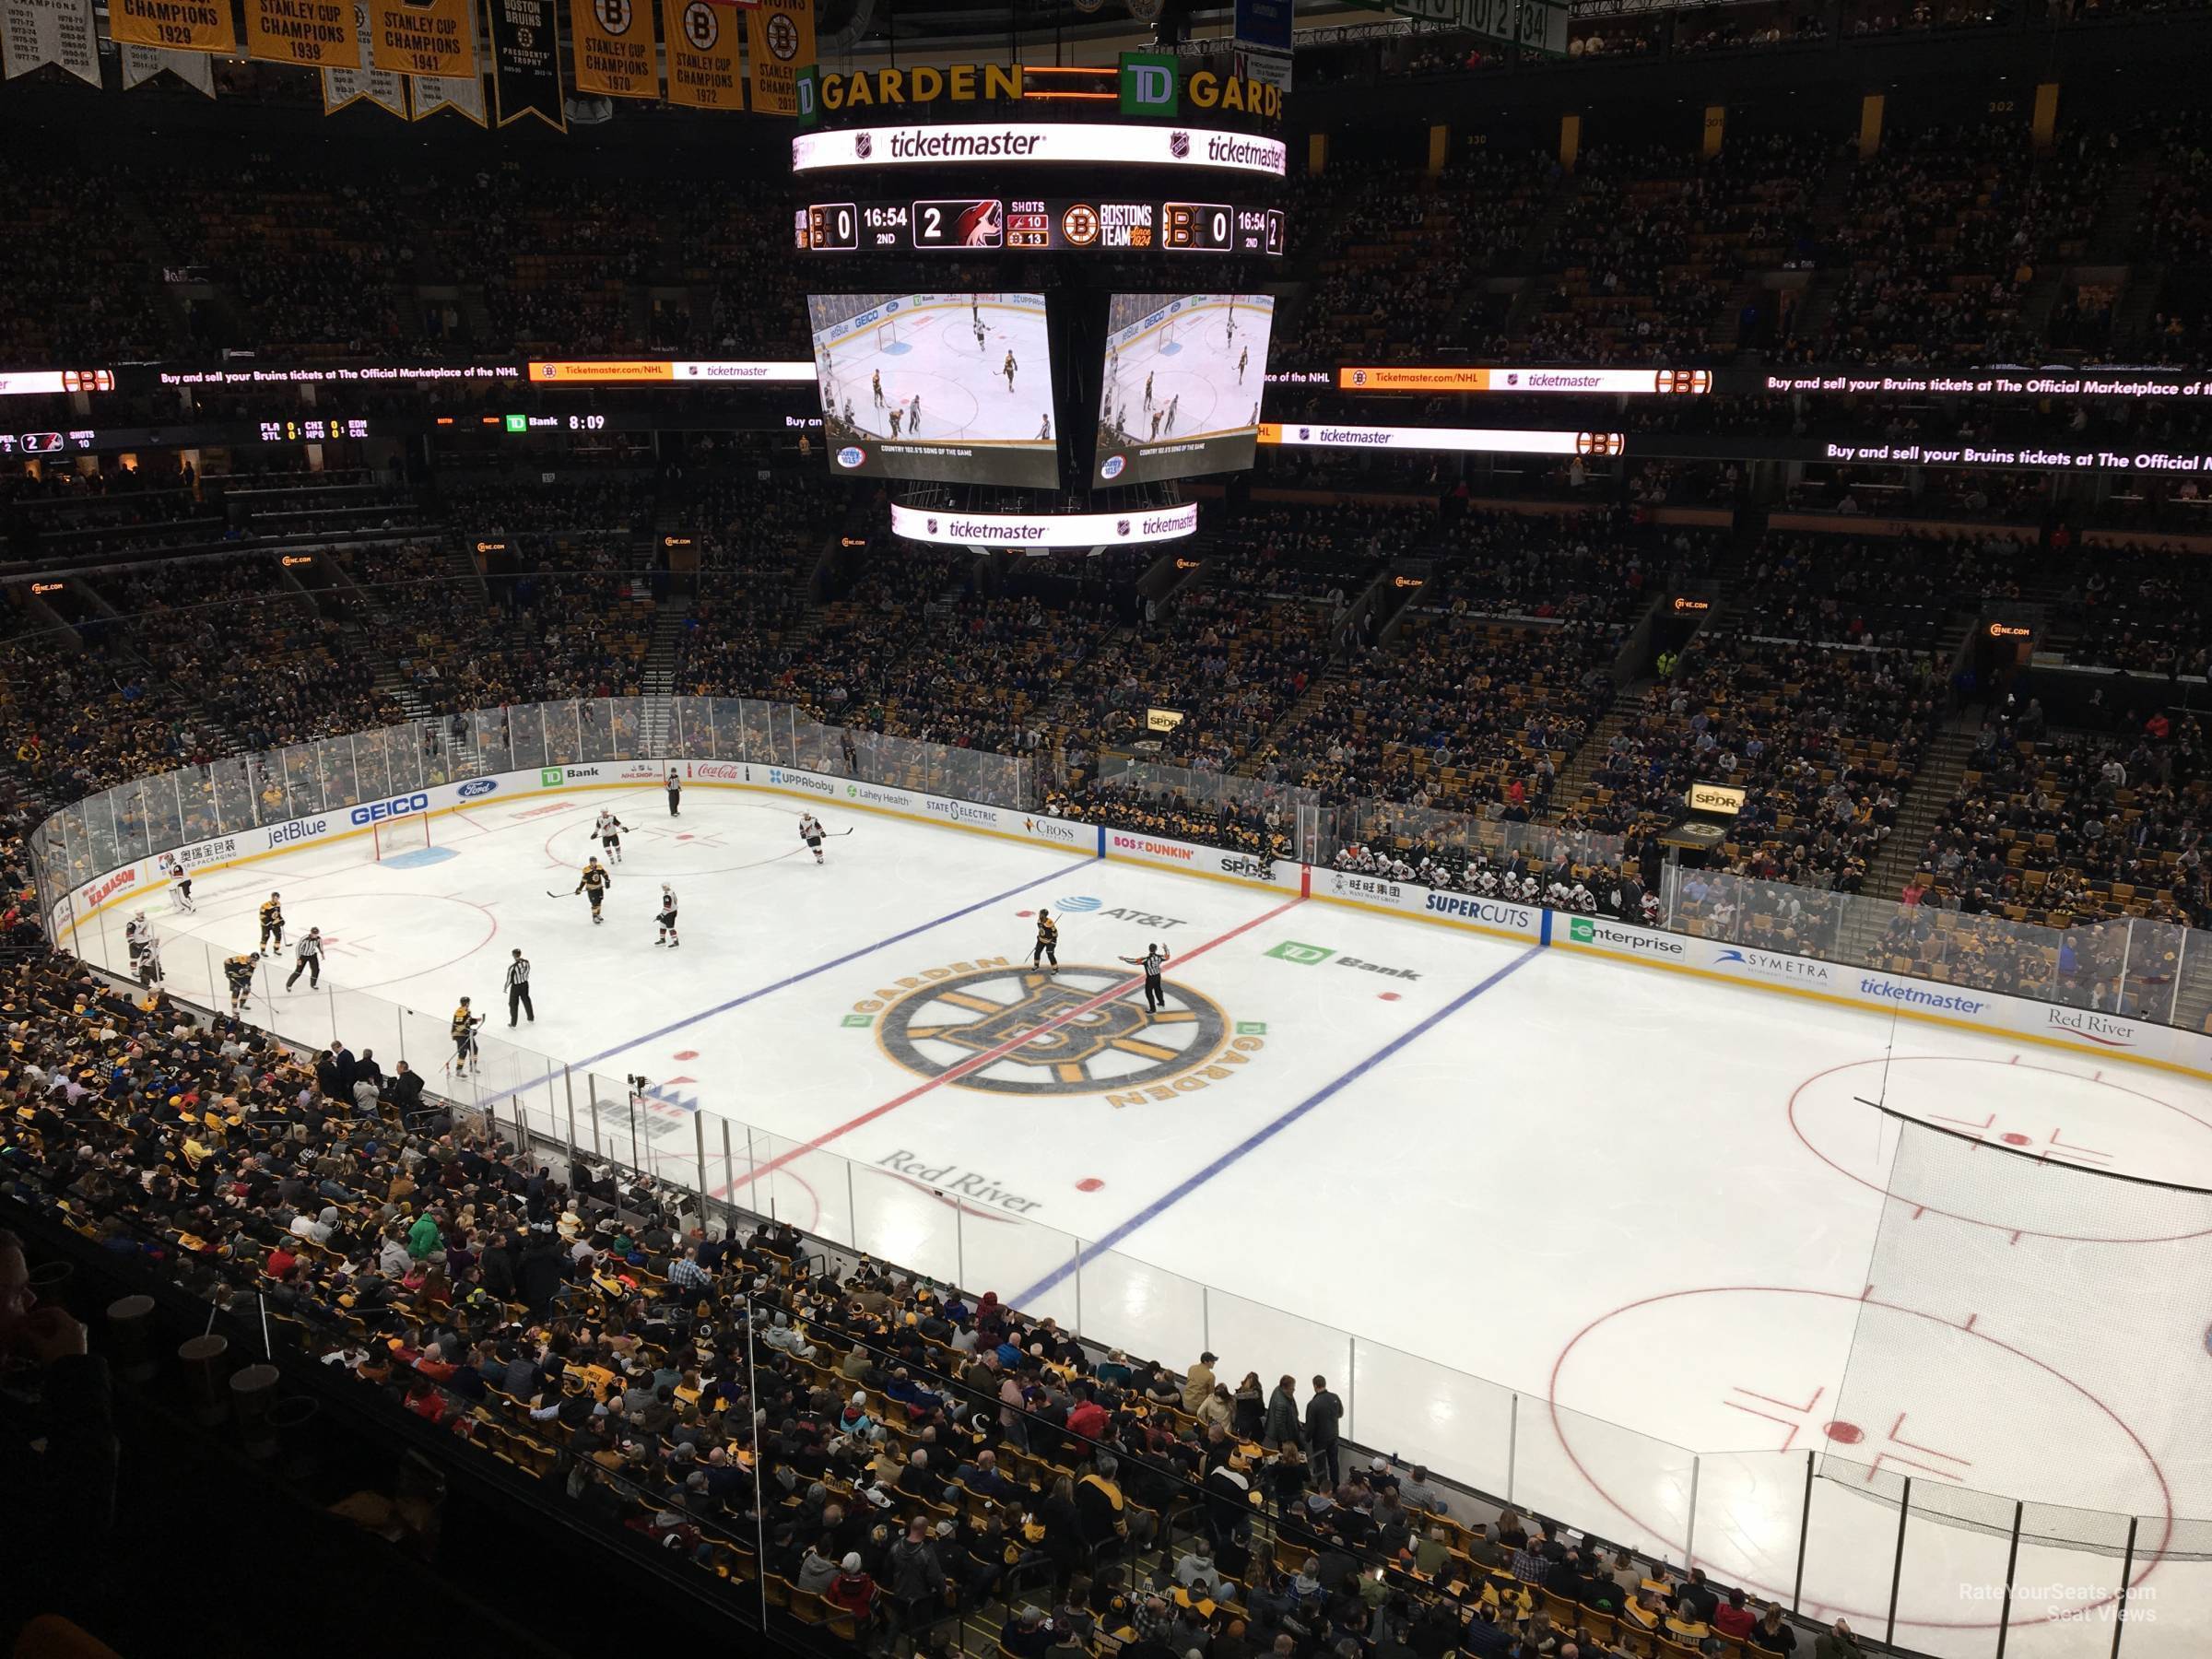 section 313, row 3 seat view  for hockey - td garden